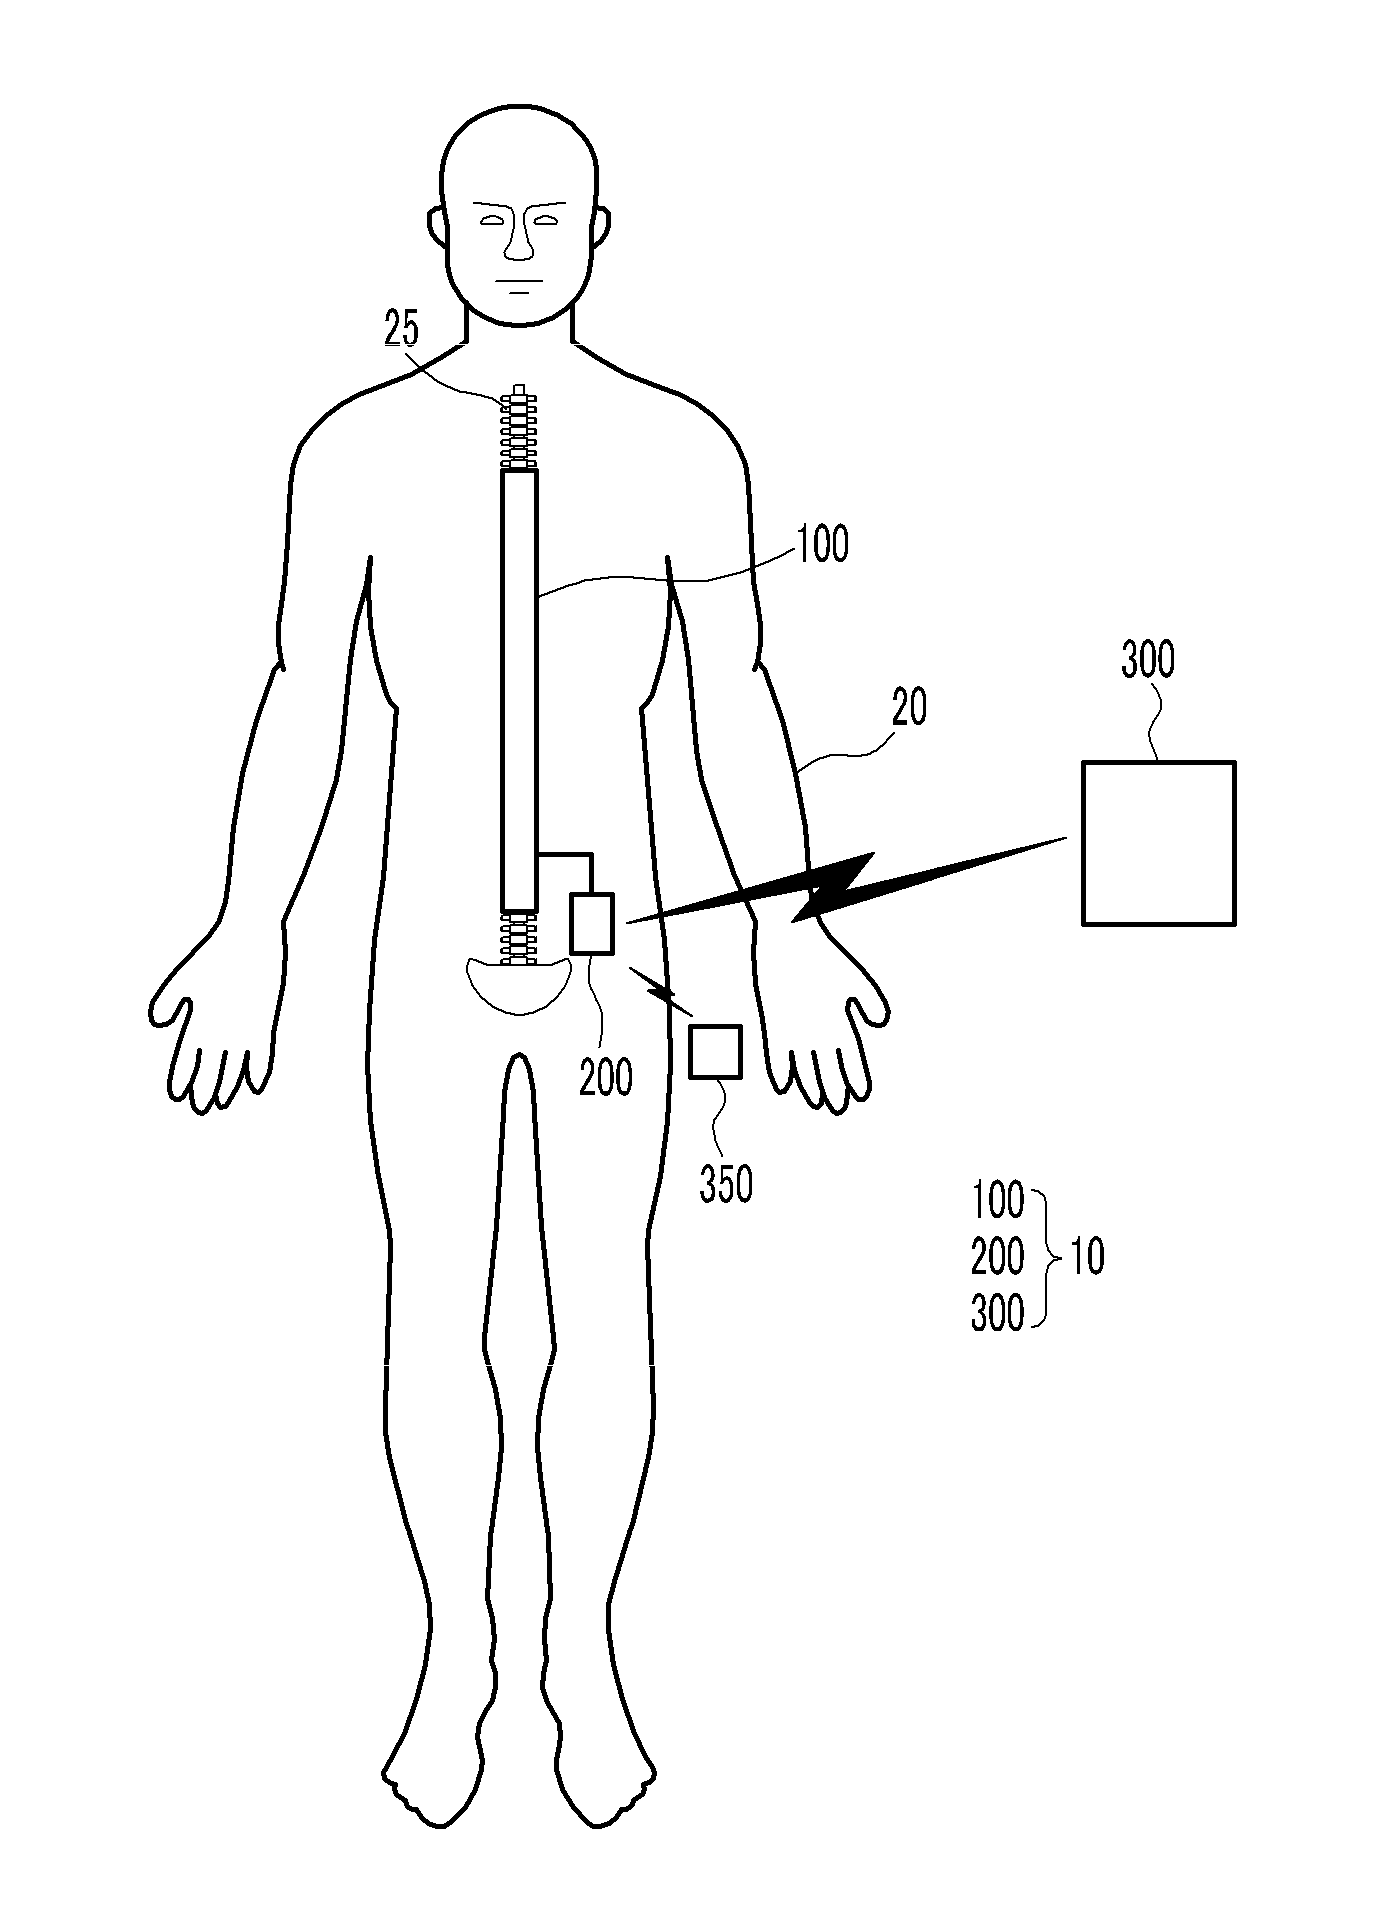 Reforming device